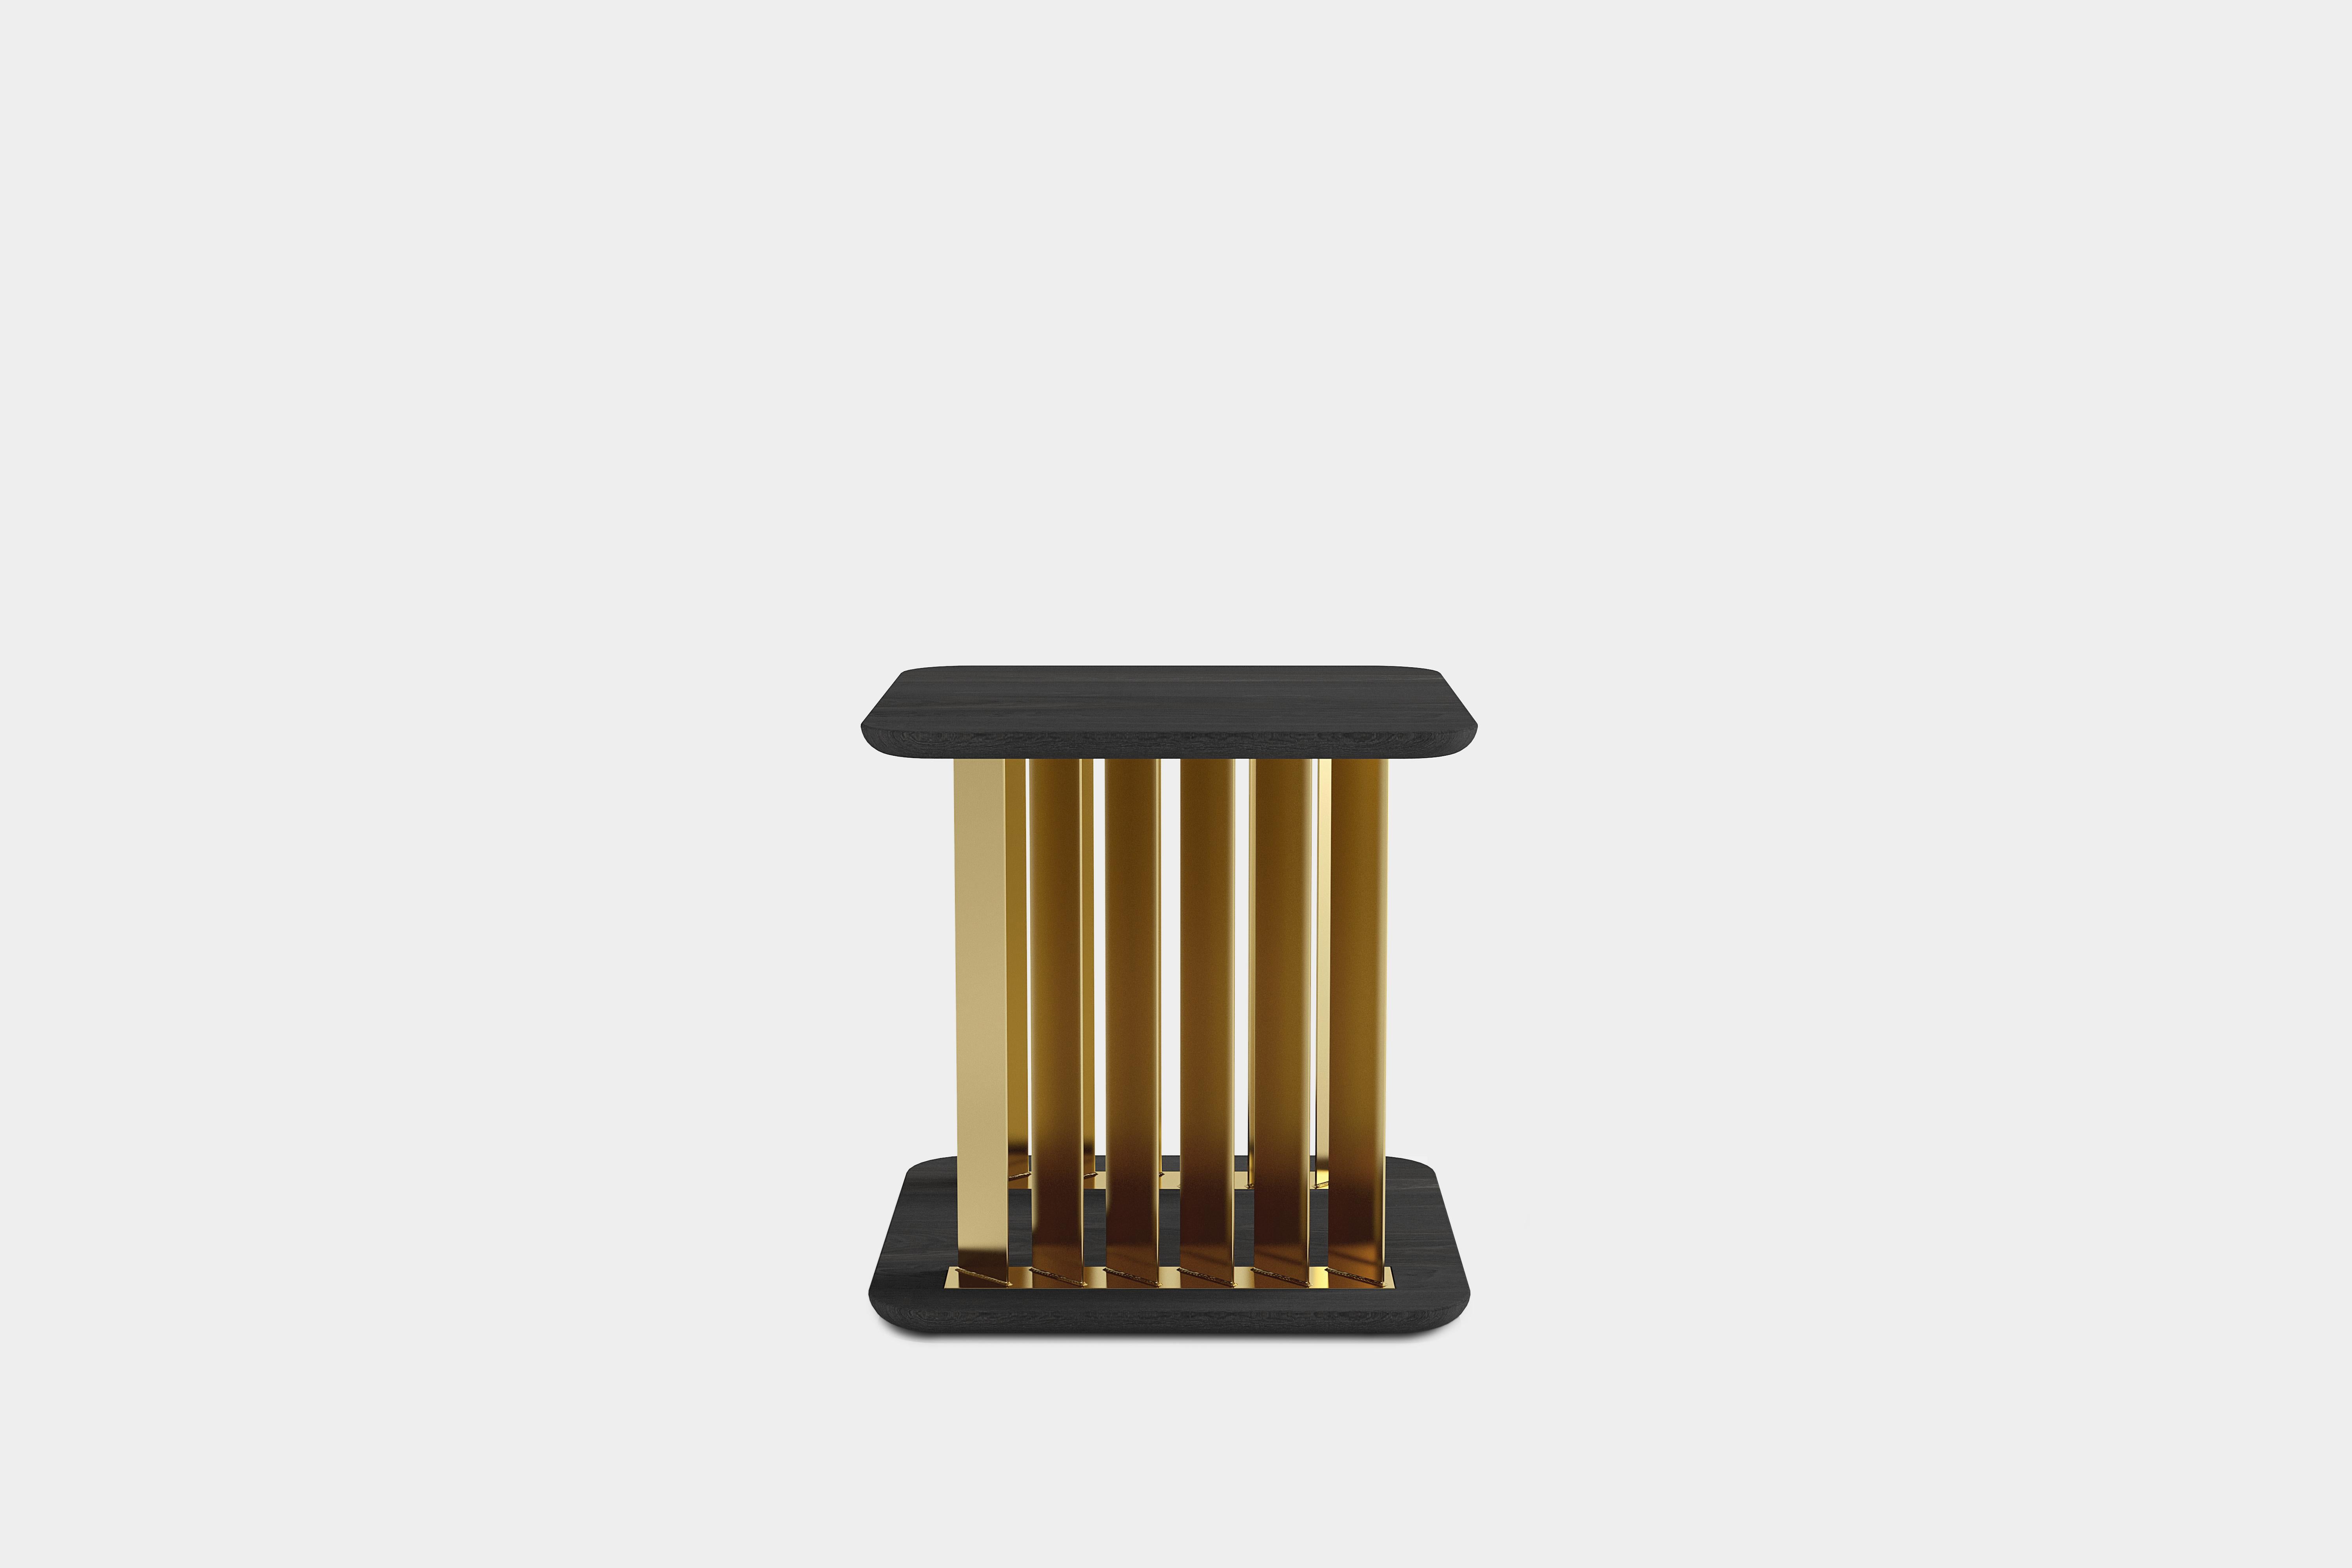 Plateau Side Table, Night Stand in Black Wood and Brass Structure by NONO

Inspired by the majesty of mountain systems throughout the Americas, Plateau makes reference to the small surfaces that emerge from a vast piece of land peculiar for its